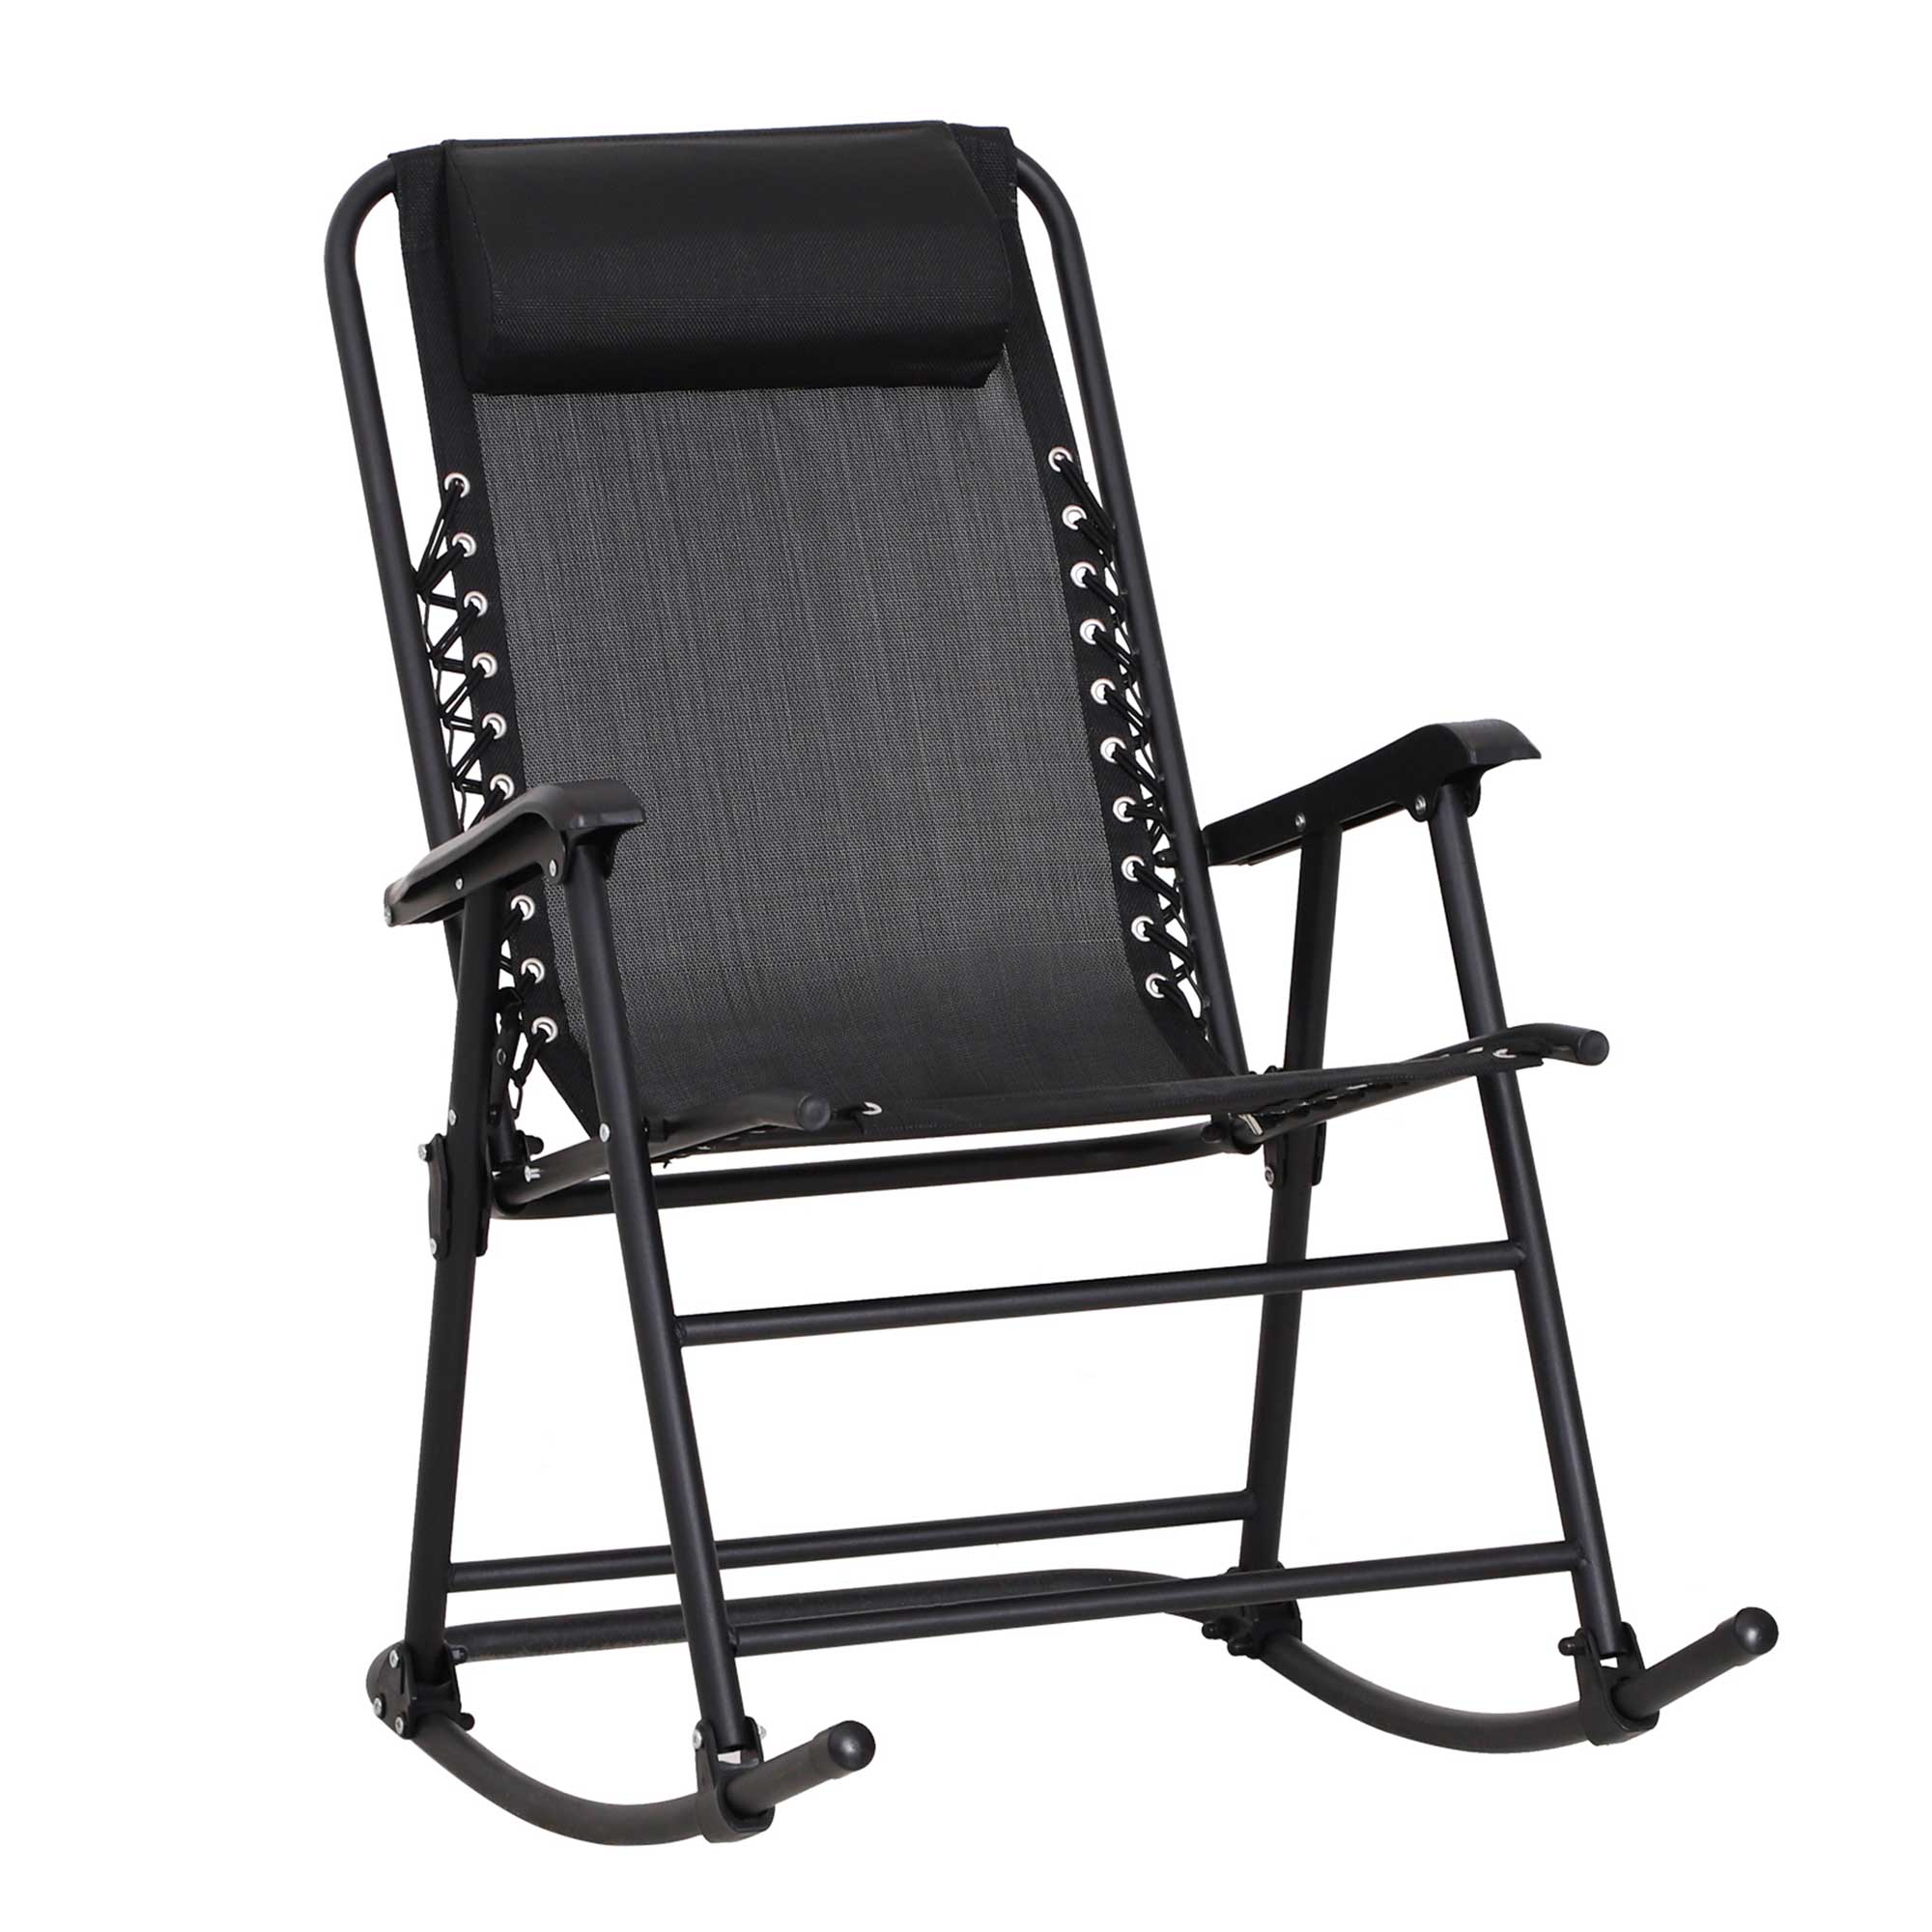 Outsunny Rocking Garden Chair, Foldable Outdoor Rocker with Adjustable Zero-Gravity Seat and Headrest, Ideal for Camping, Fishing, Patio, Black